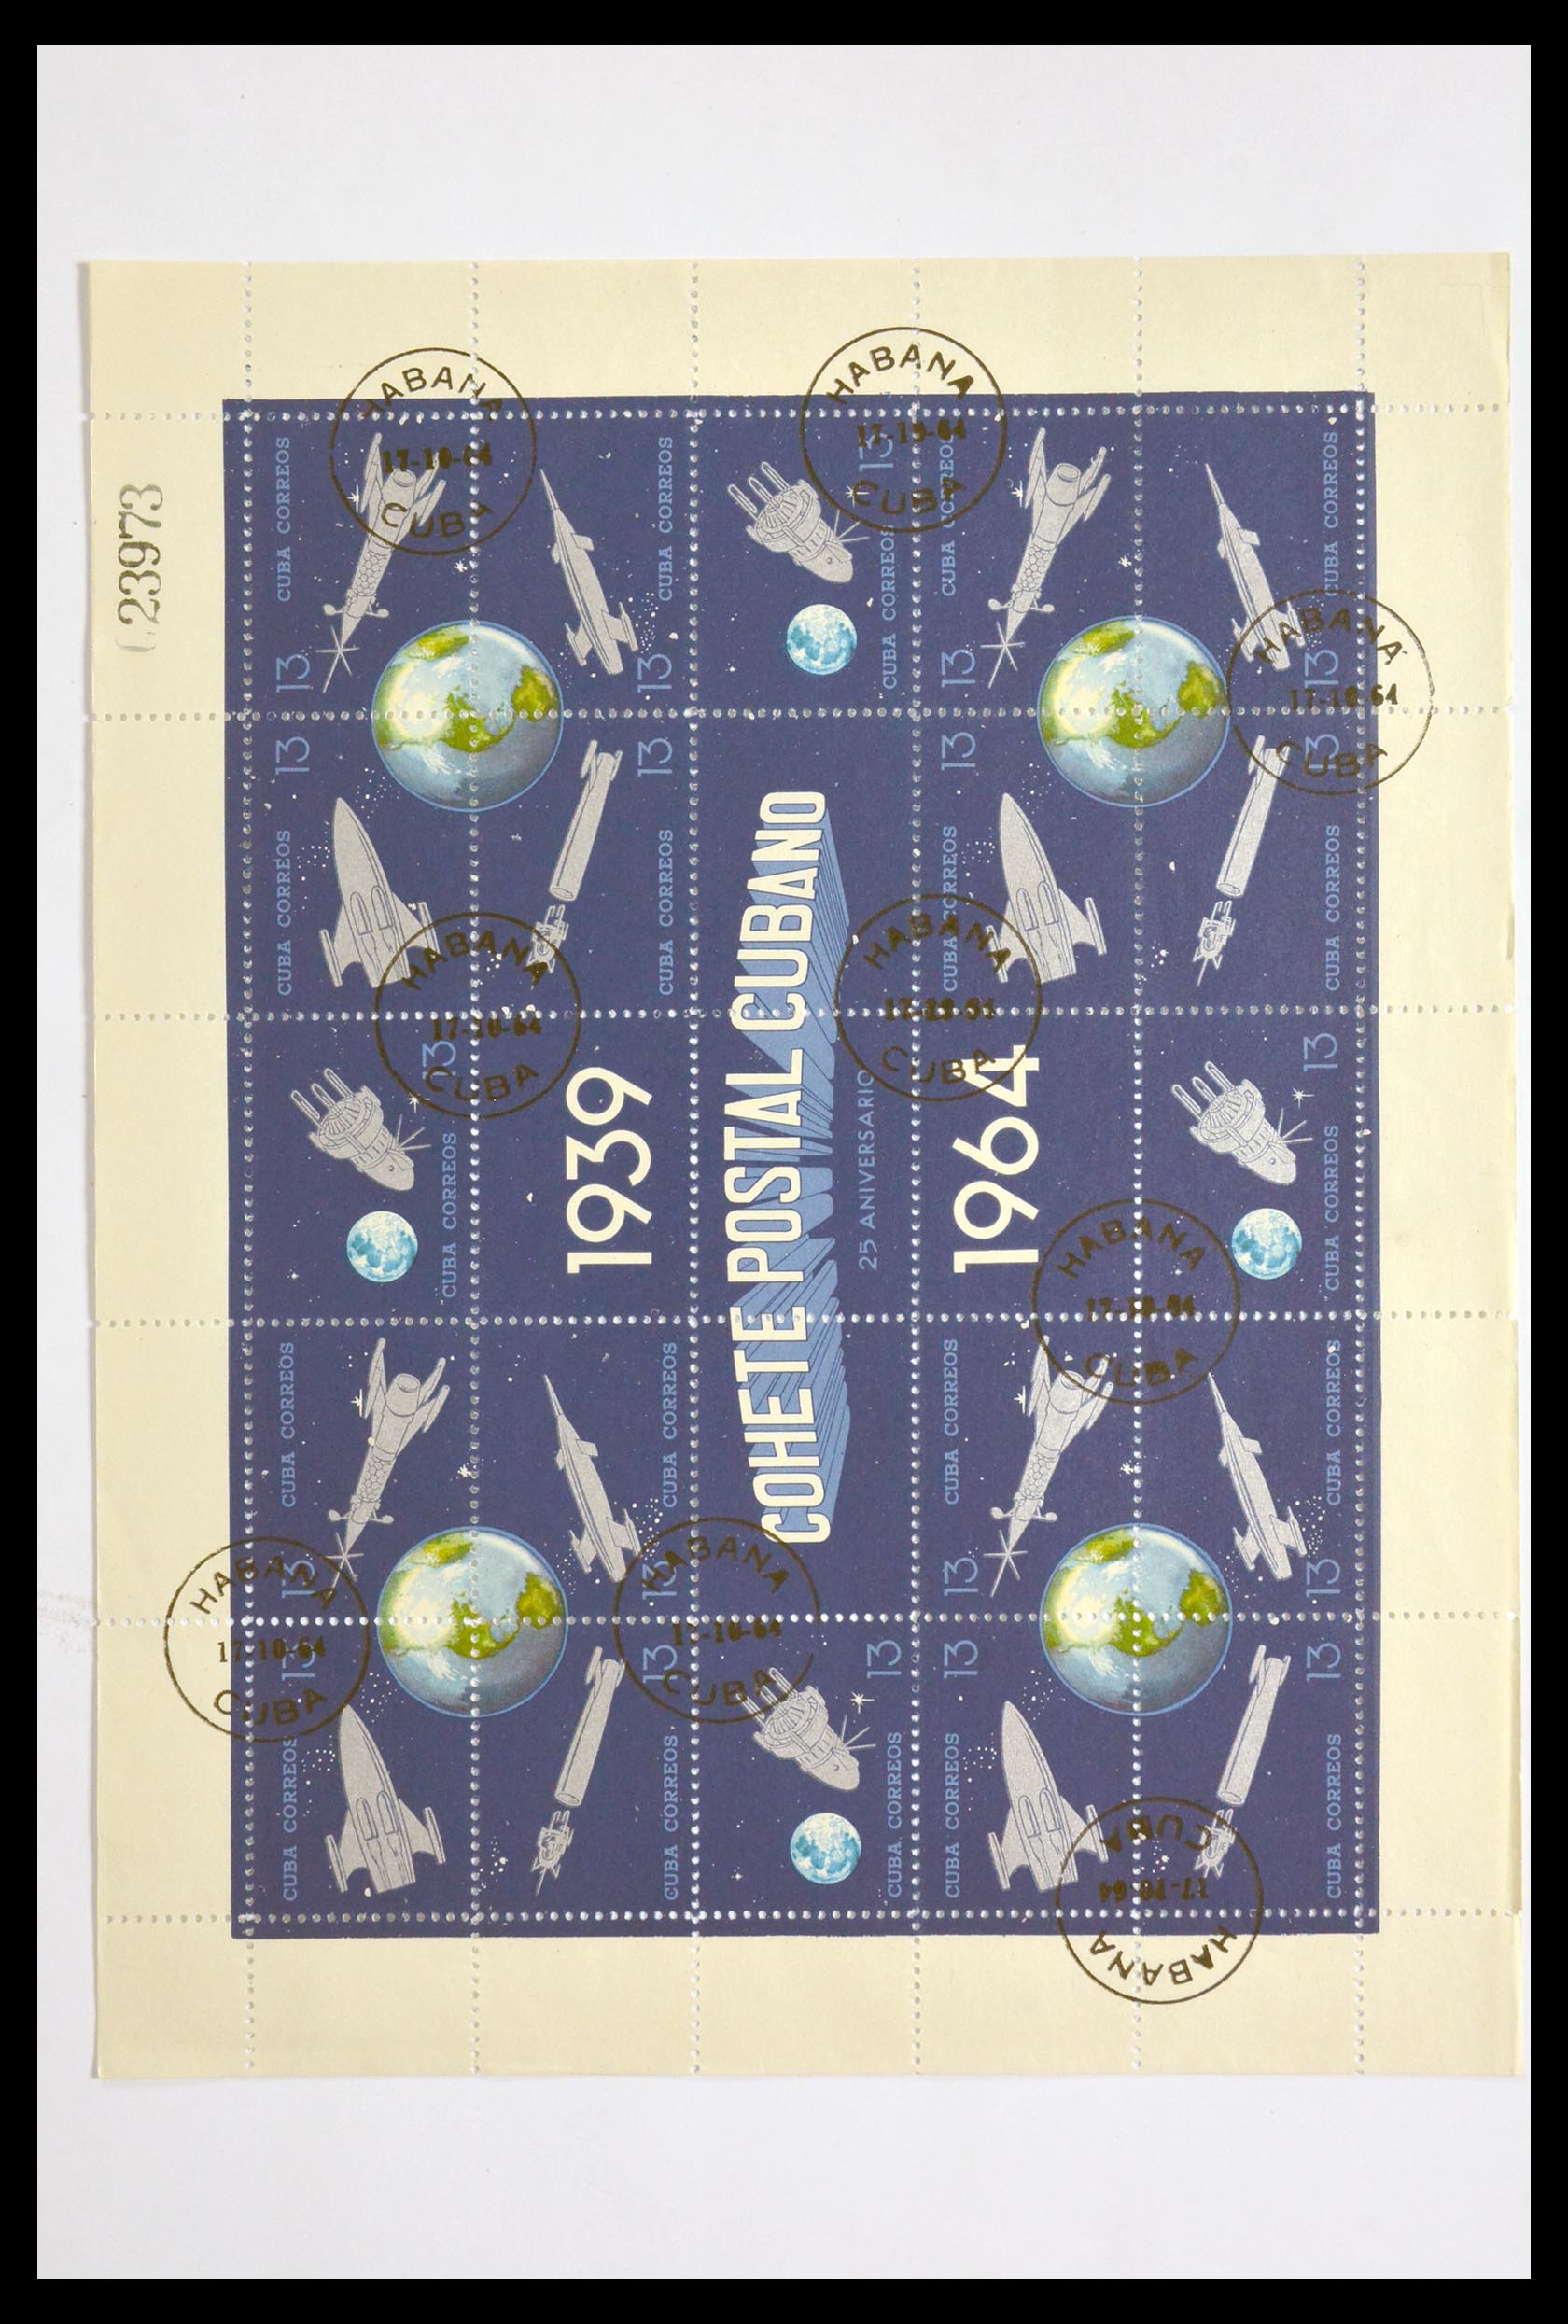 29917 071 - 29917 Latin America airmail stamps.